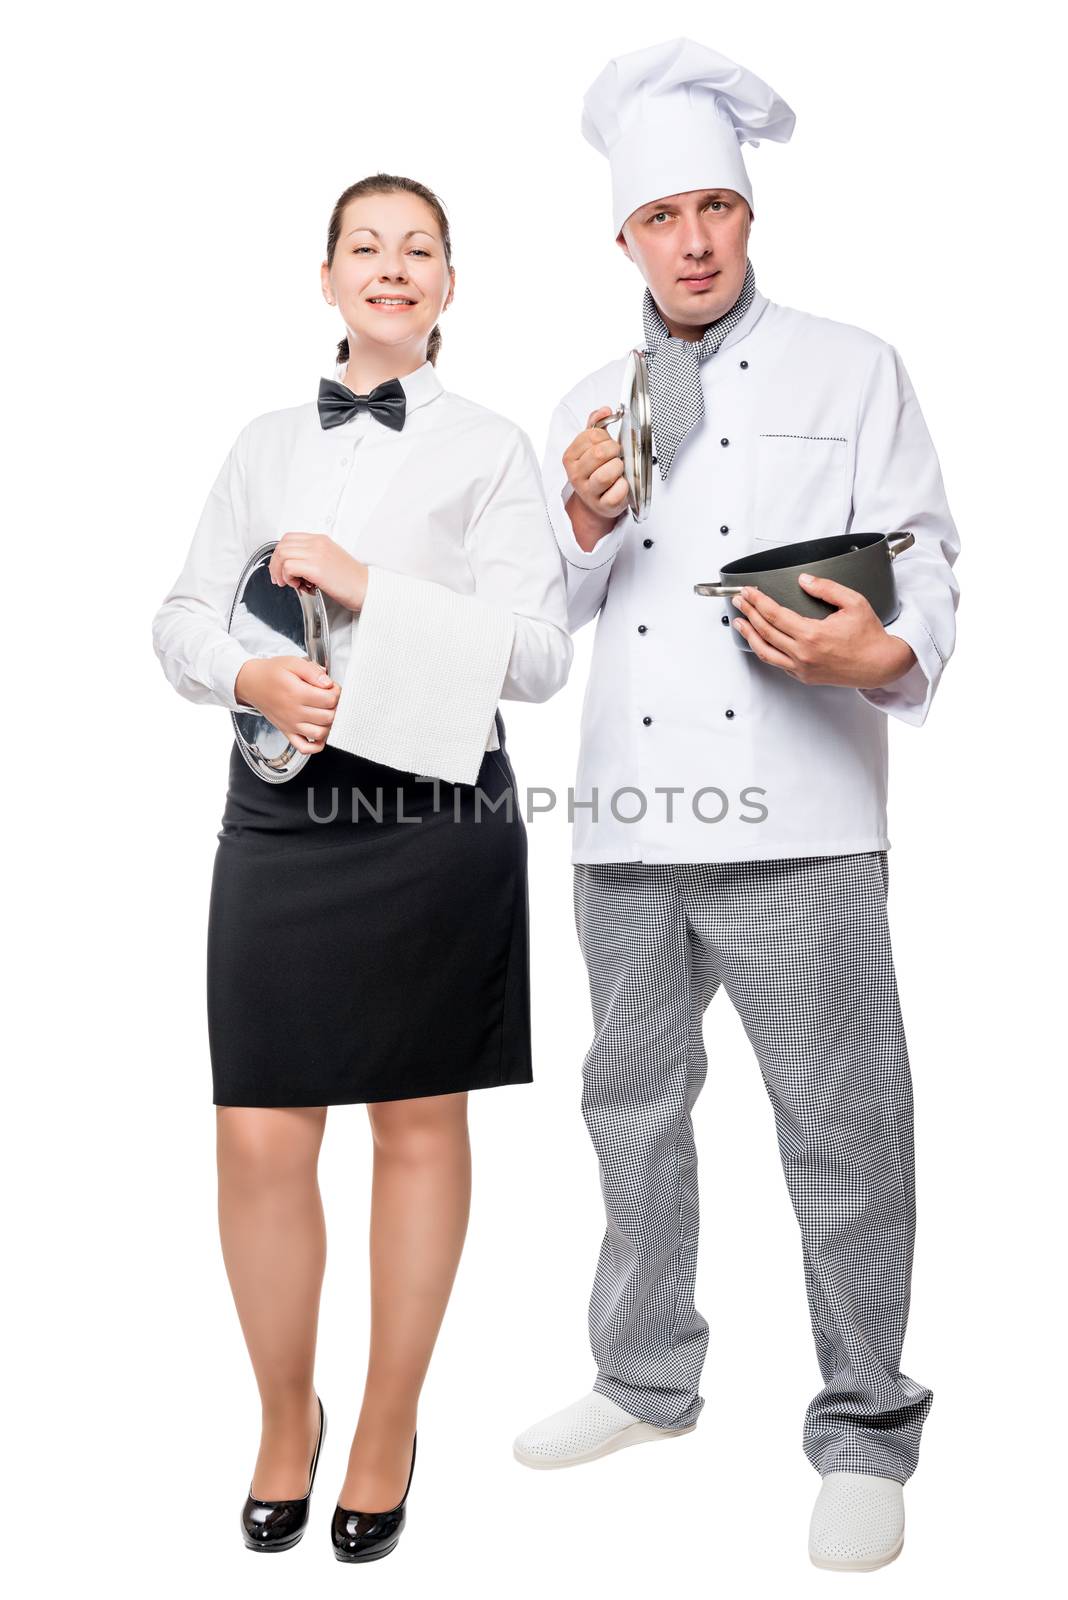 Chef with pan and waitress with a tray on a white background in by kosmsos111